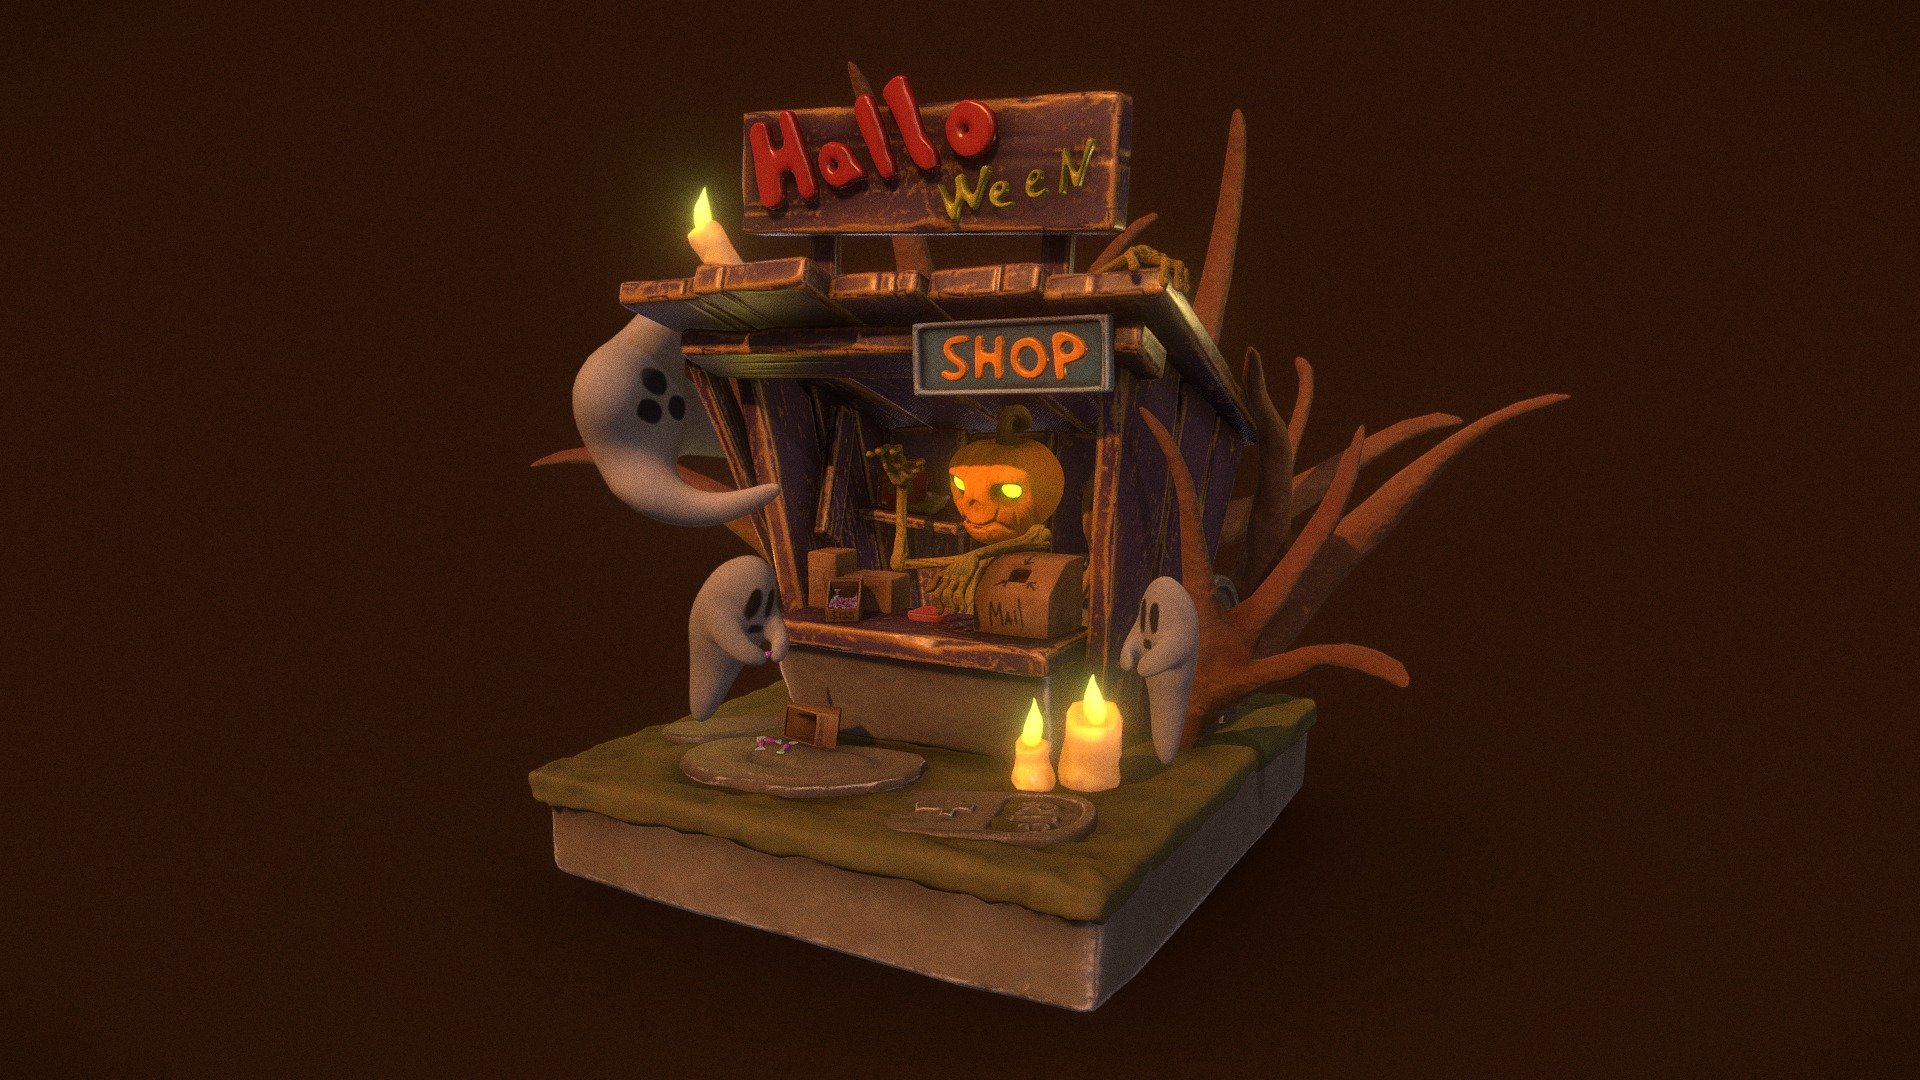 This is a small market house of the Pumpkin Man, who live nearby of clumsy ghosts.

Look on ArtStation https://www.artstation.com/artwork/3da6nB

Work made specially for #HauntedHouseChallenge 3d model